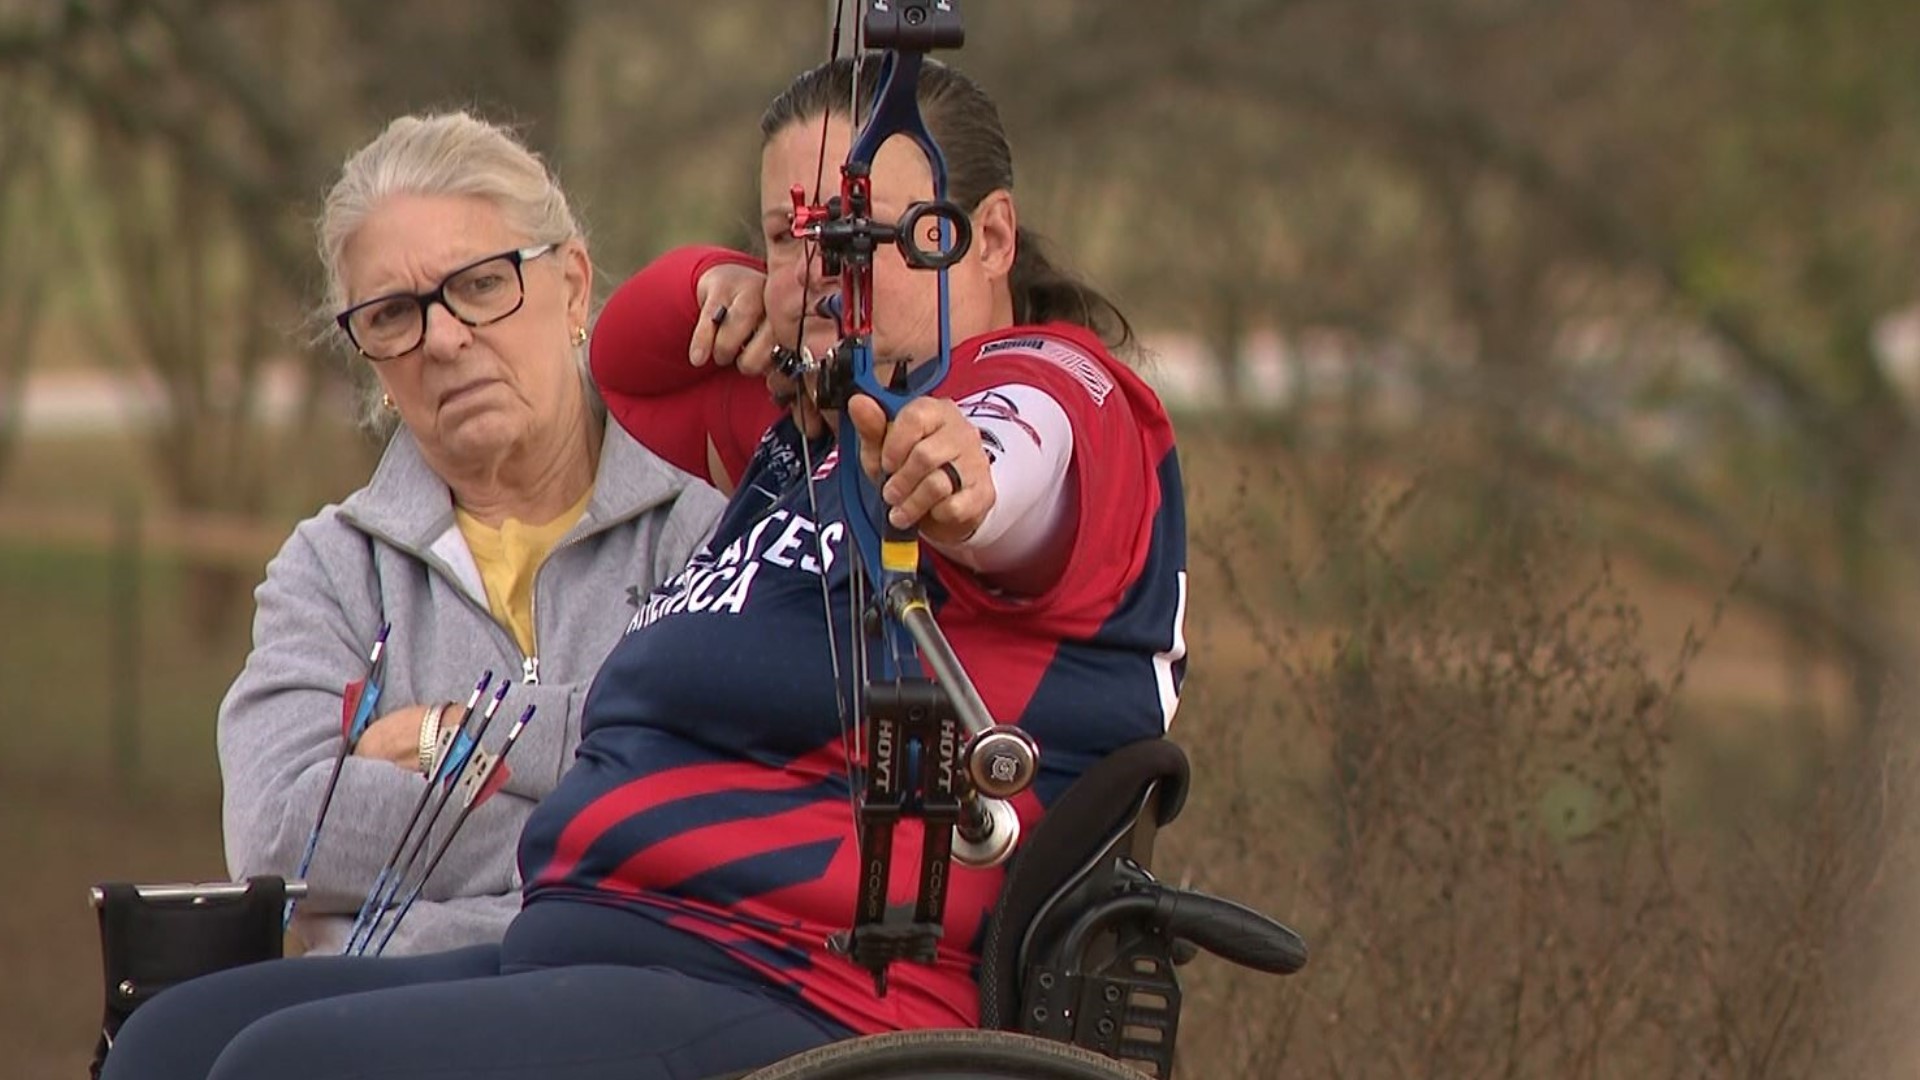 Erev King is ranked 19th in the world and now wants to compete in both archery and dressage in Paris.